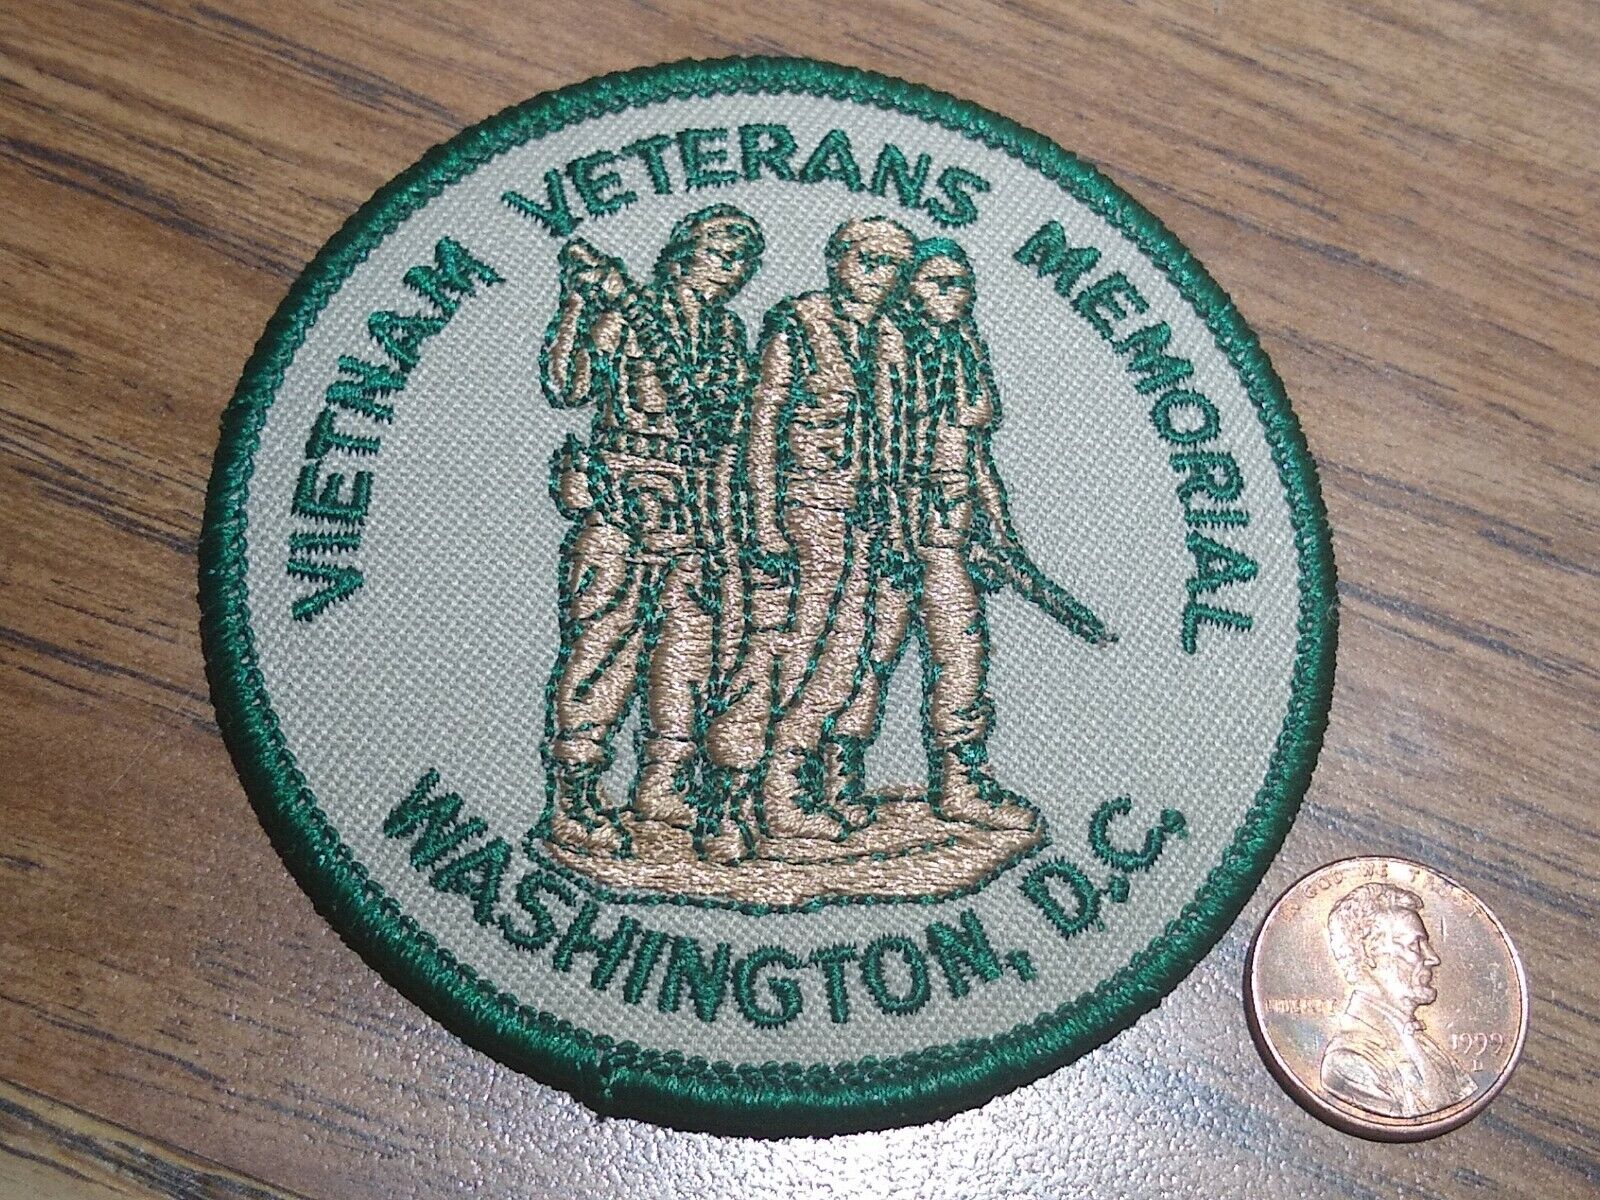 NEW Vietnam Veterans Memorial Washington DC Embroidered Voyager Iron-on Patch 